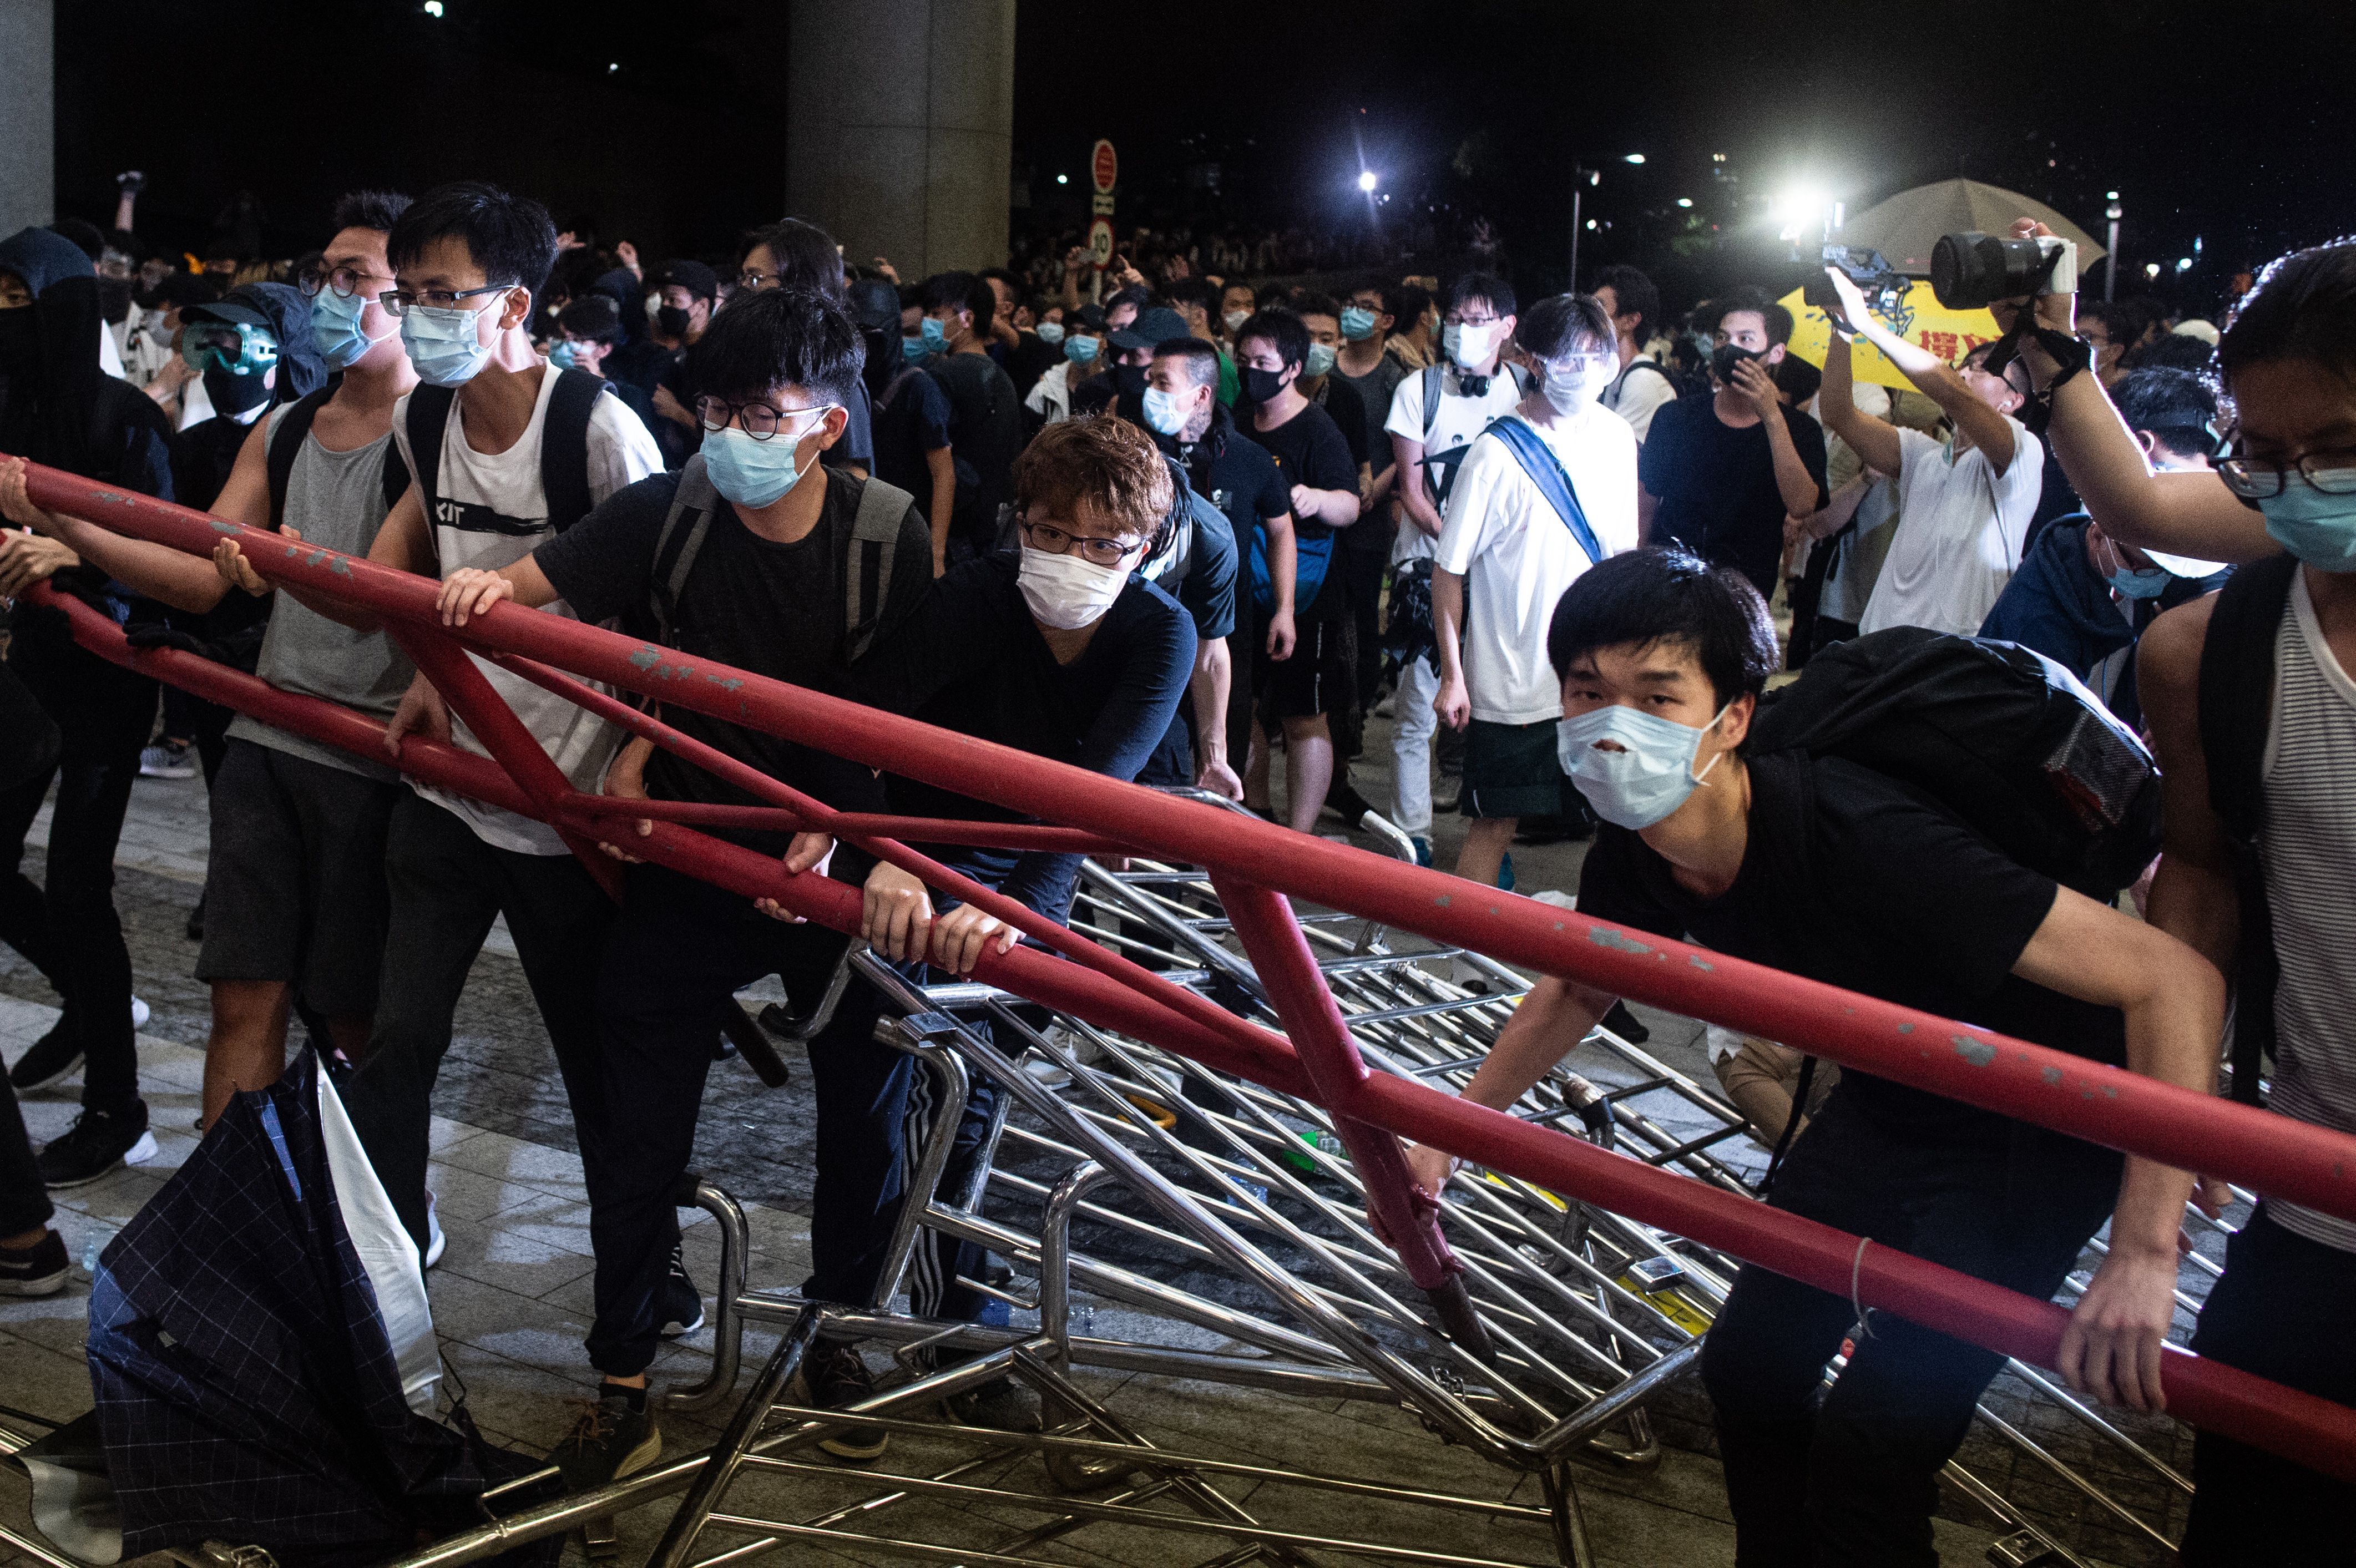 Protesters block the protest area of Legislative Council with barricades.